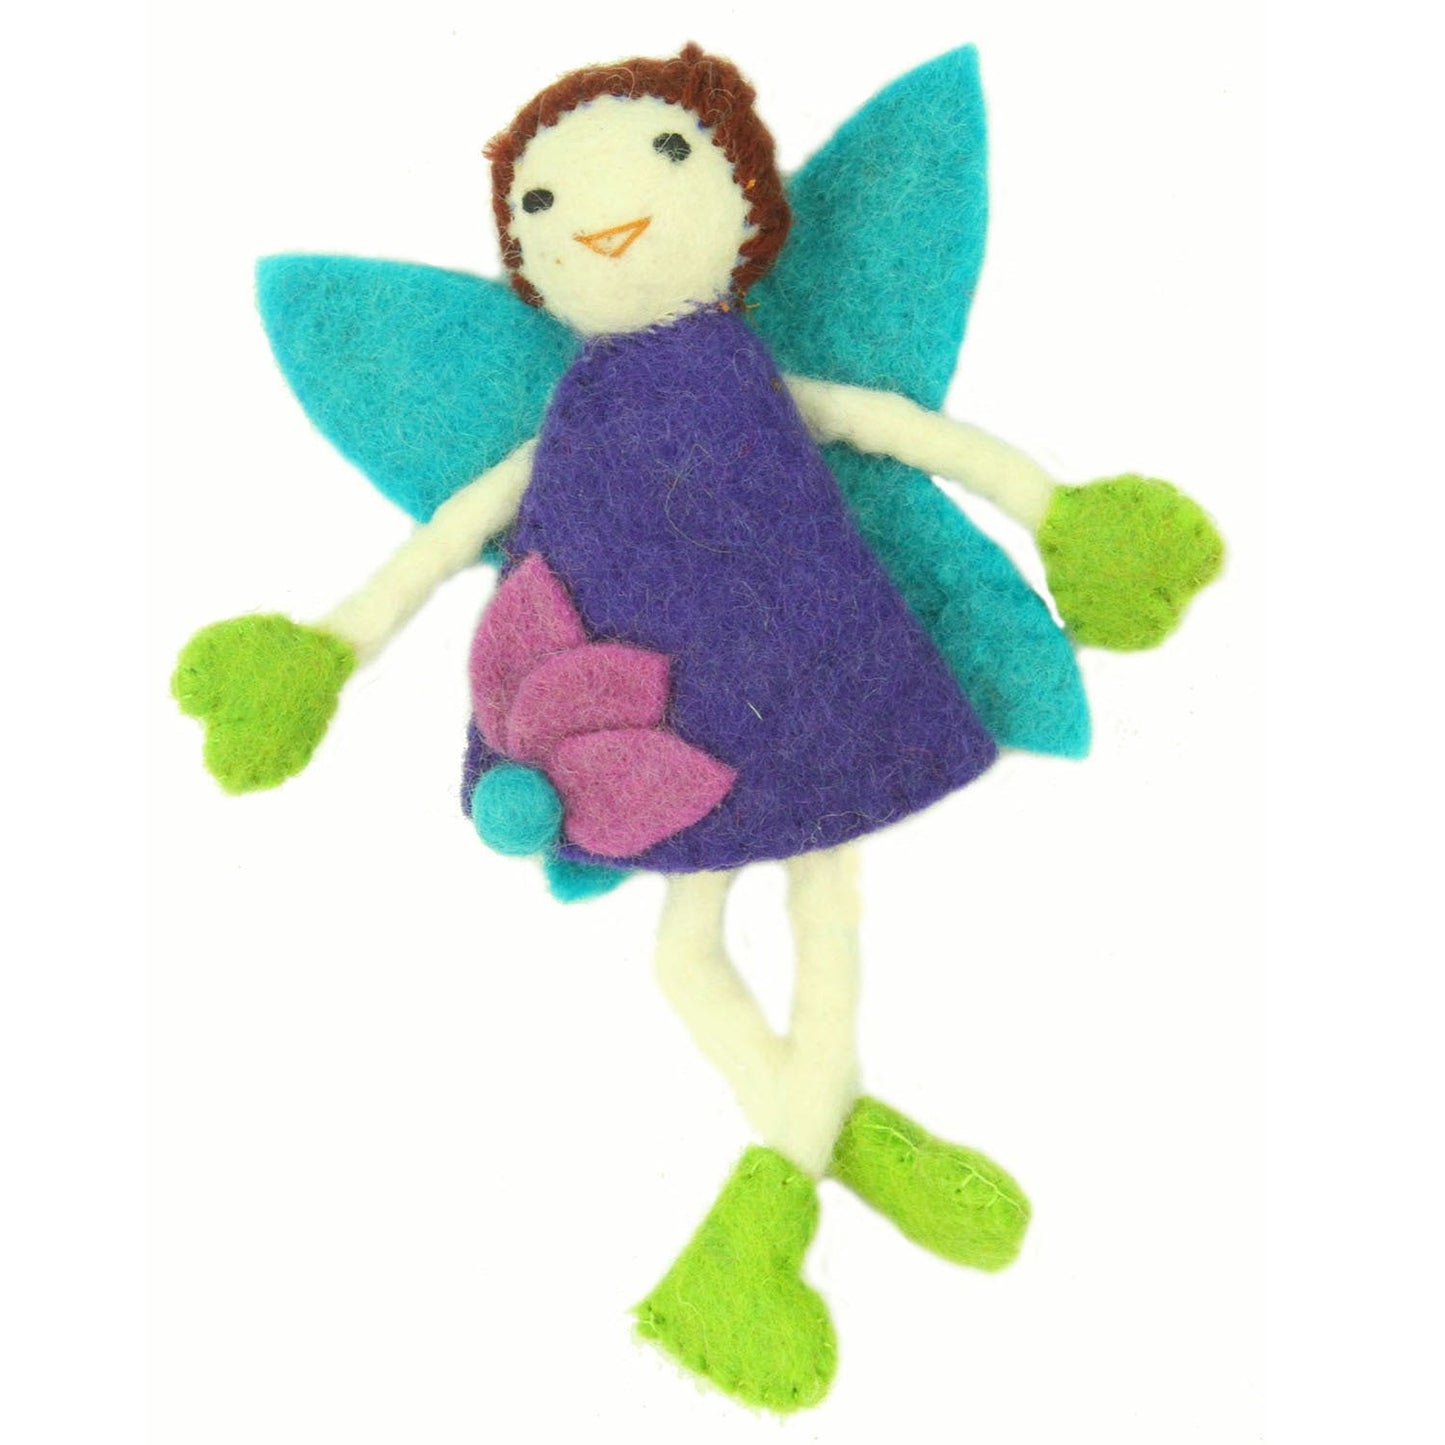 hand-felted-tooth-fairy-pillow-brunette-with-purple-dress-global-groove